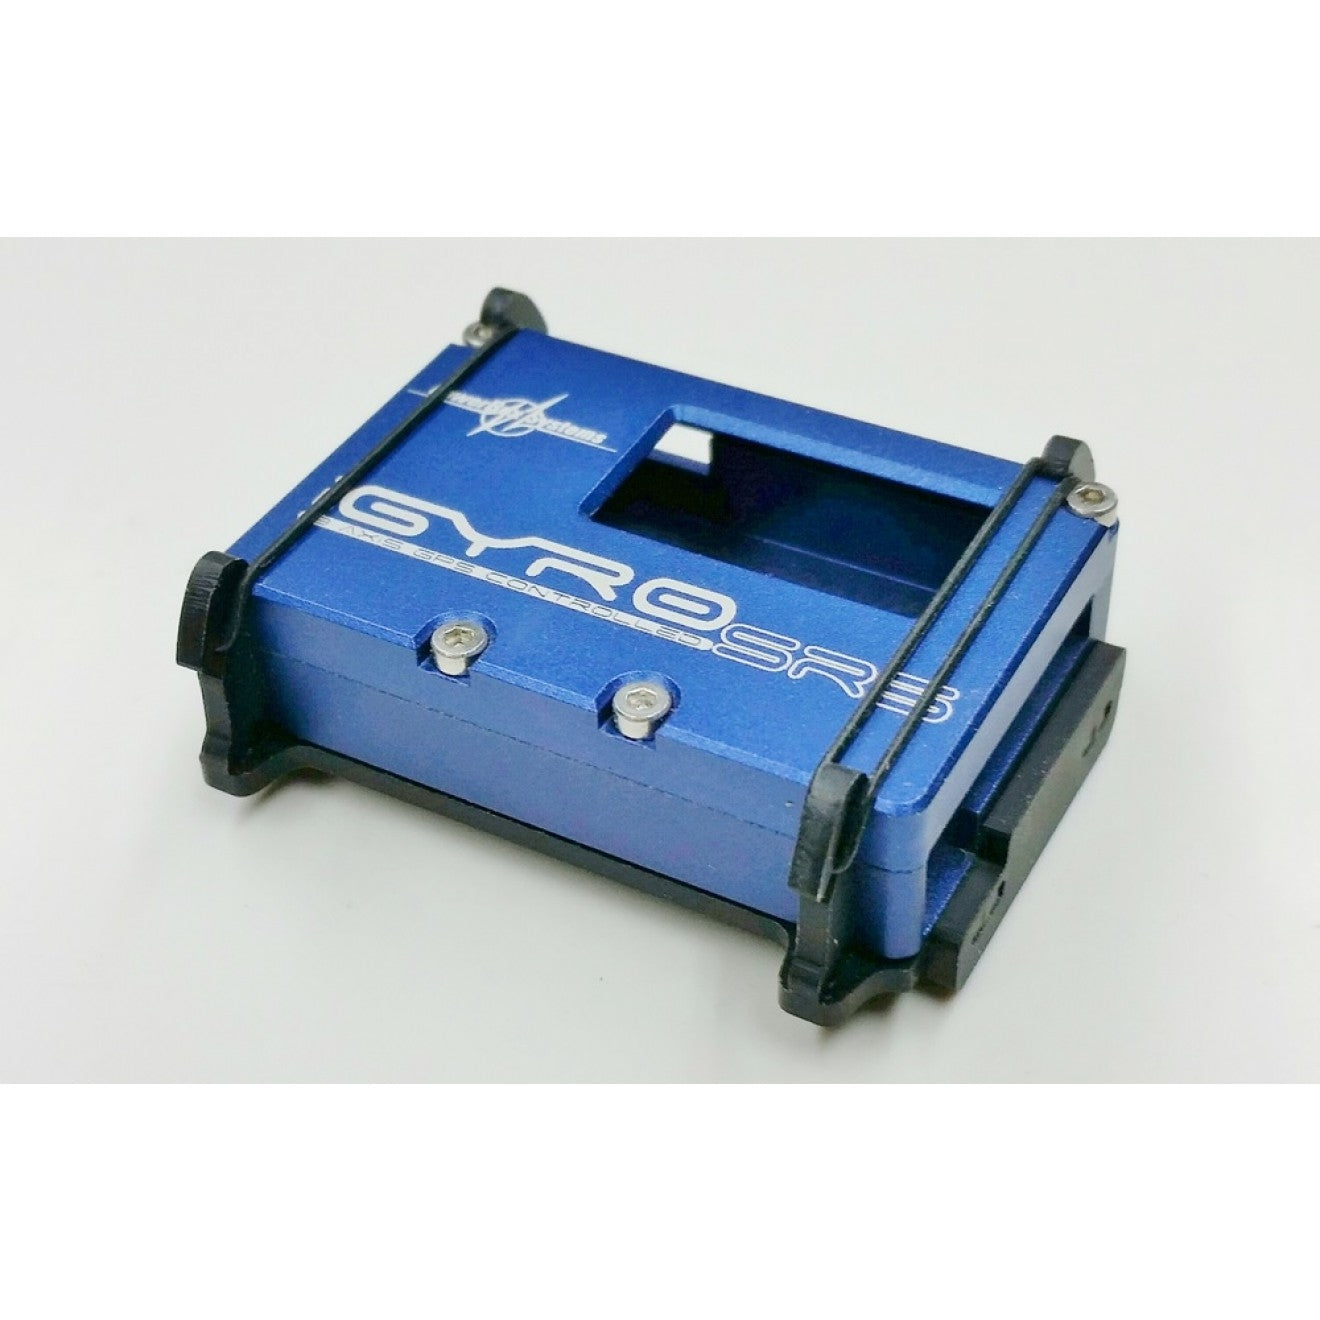 PowerBox Systems iGyro Click Holder from STV-Tech 021-08